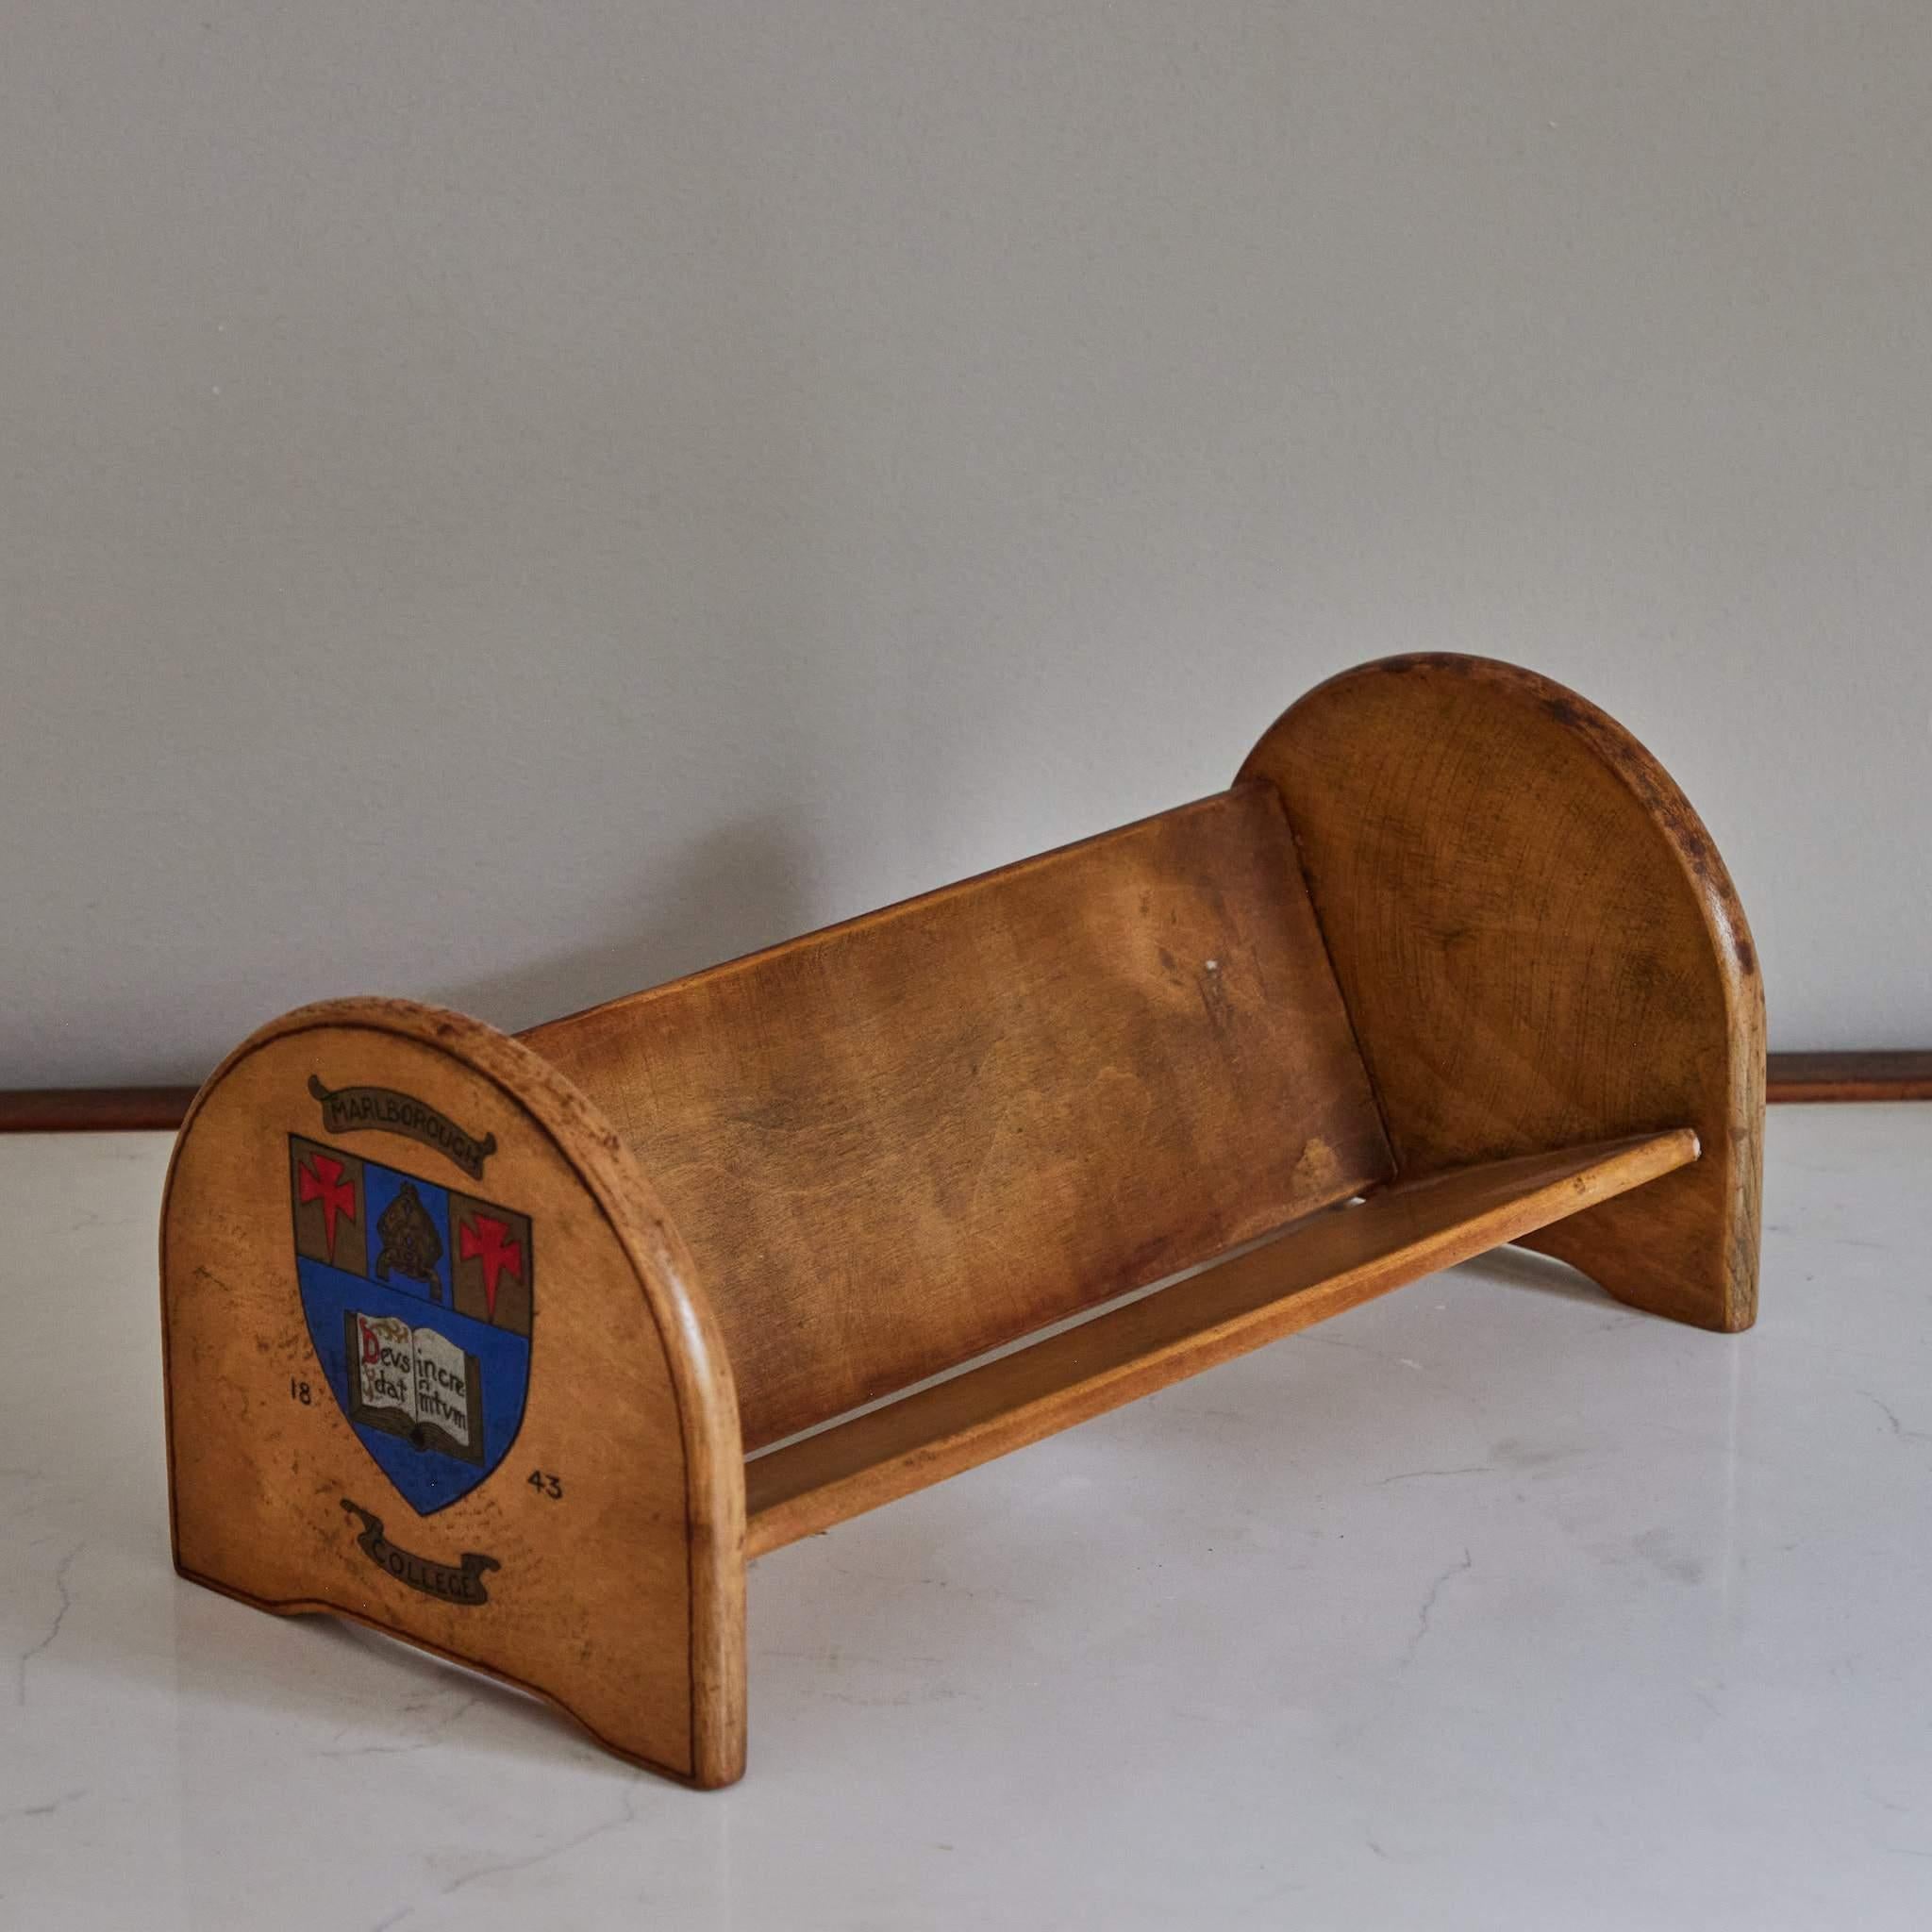 Early 20th-century book shelf from an English boarding school. Charming and conveniently scaled, the shelf features a hand-painted Marlborough College crest on either of its sides. With the soft blond patina of wood and cozy scholastic feel, this